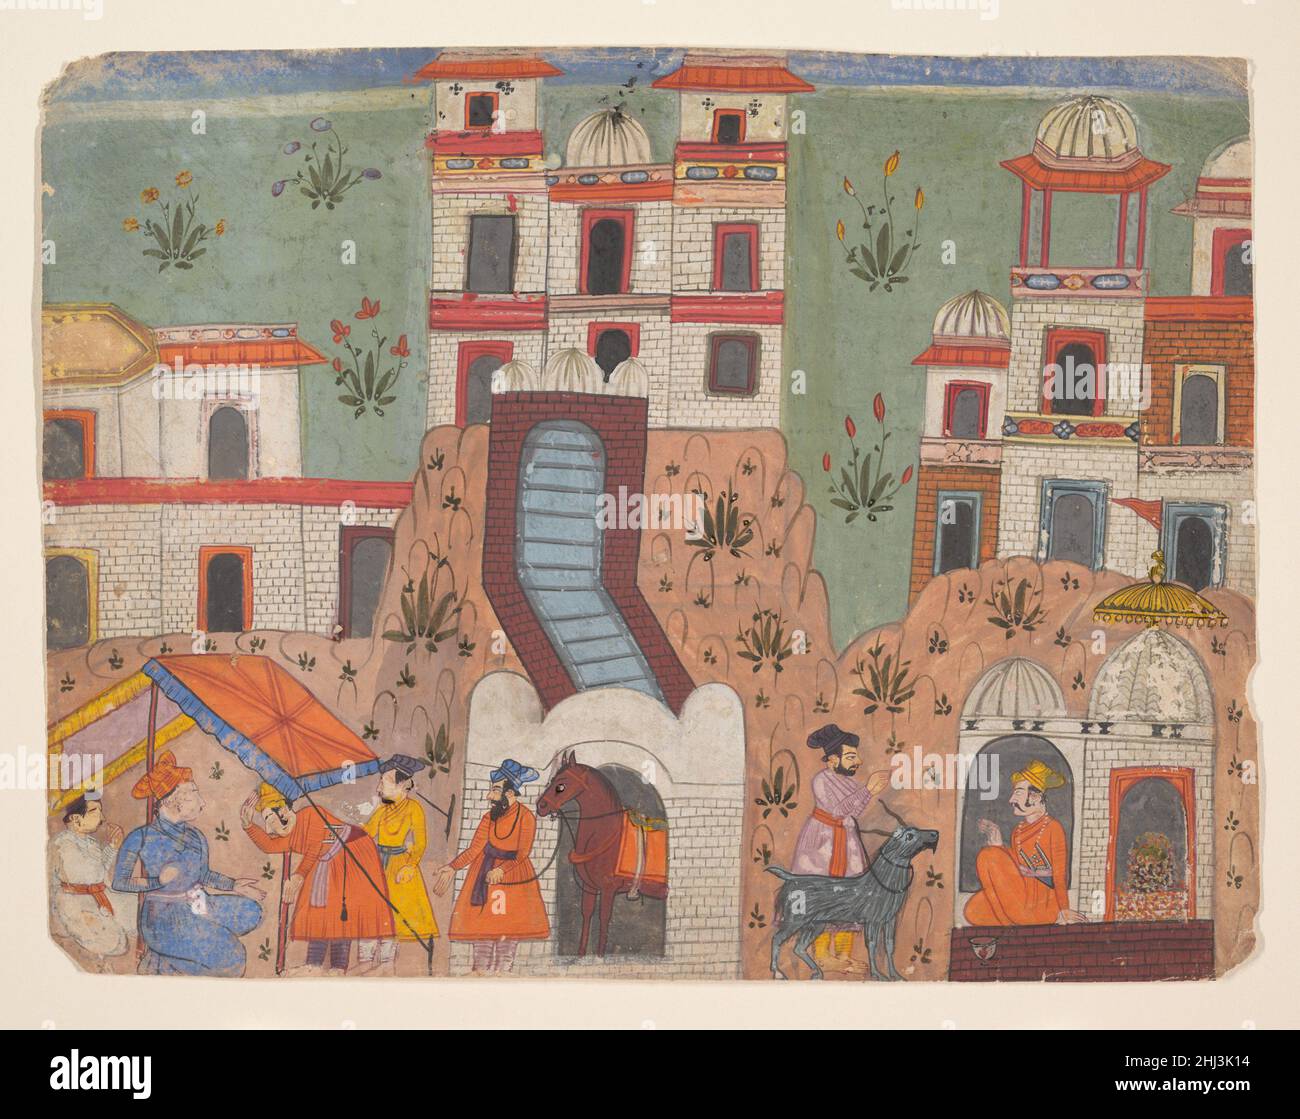 A Raja Receives Homage Outside the City: Page from a Dispersed Manuscript last quarter of the 17th century India (Punjab Hills, Bilaspur) This page from an unidentified Hindu chronicle of a king depicts a mountain city with typical multistoried hill architecture atop abstract mounds strewn with clumps of flowers. Outside the gates on the right is a Saivite shrine with a lingum covered by floral offerings to which a goat is led, probably for sacrifice. At the left, courtiers pay their respects to the king under a pavilion. The flat treatment of space; the thin beige, green, and blue coloring; a Stock Photo